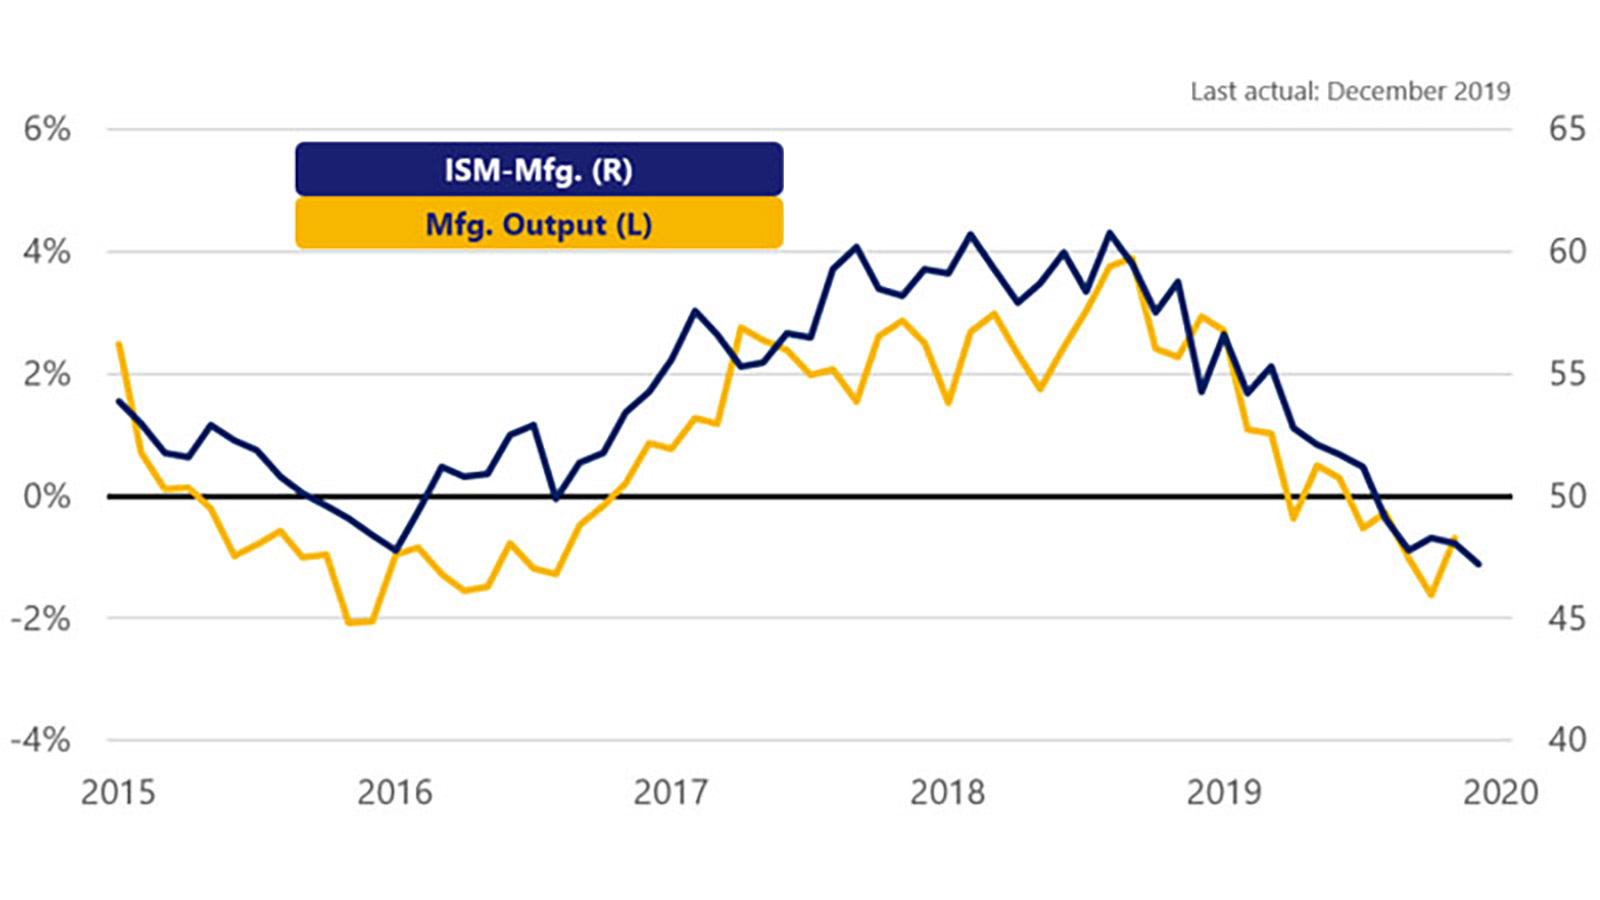 Two line charts show manufacturing range from 53.9 in Jan 2015 to 47.2 in Dec 2019 and manufacturing output from 2.49 in Jan 2015 to -0.67 in Nov 2019.